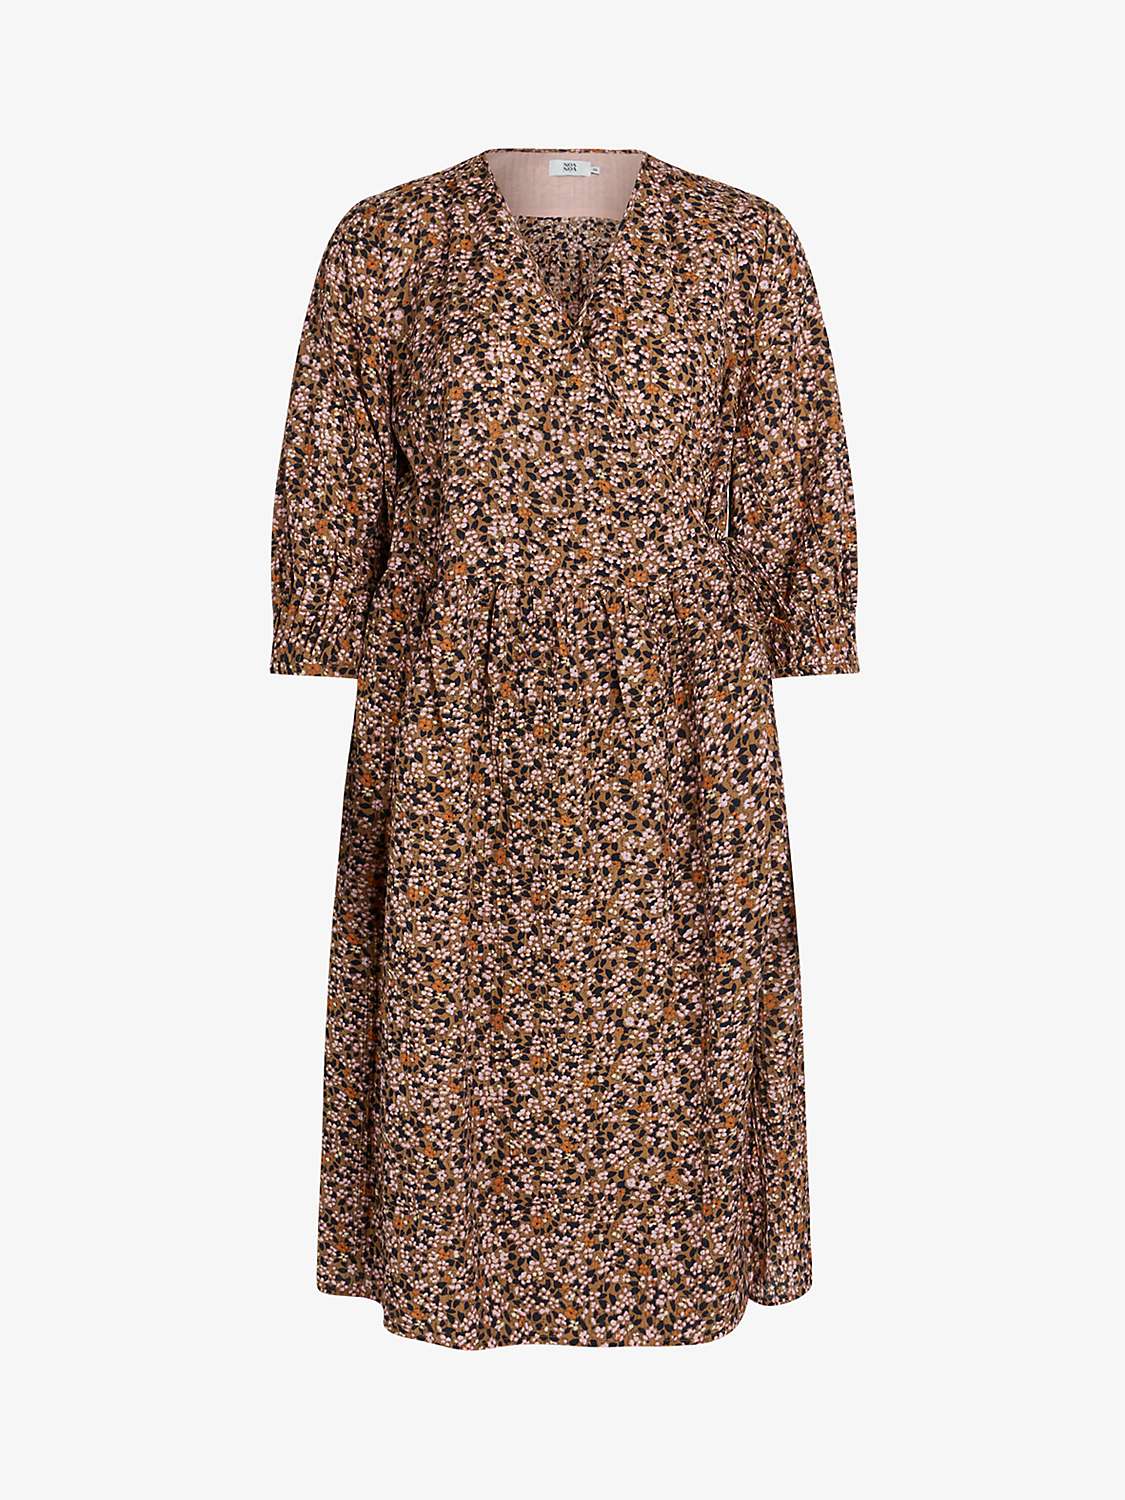 Buy Noa Noa Camille Ditsy Floral Print Midi Wrap Dress, Navy/Brown Online at johnlewis.com